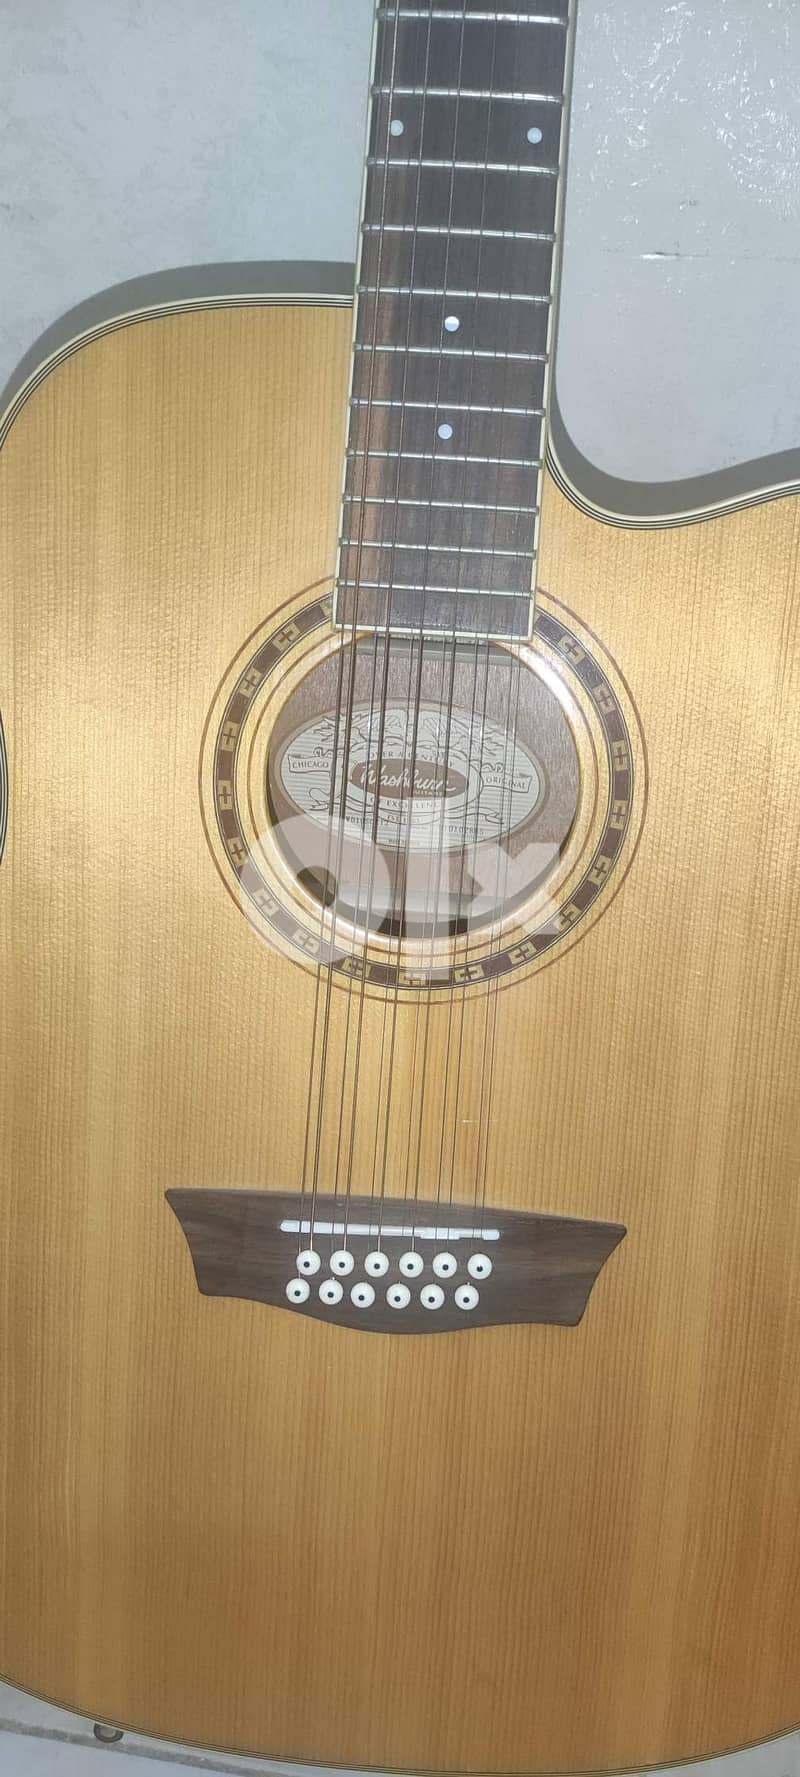 Washburn 12 String Acoustic / Electric Guitar - جيتار 12 وتر 6